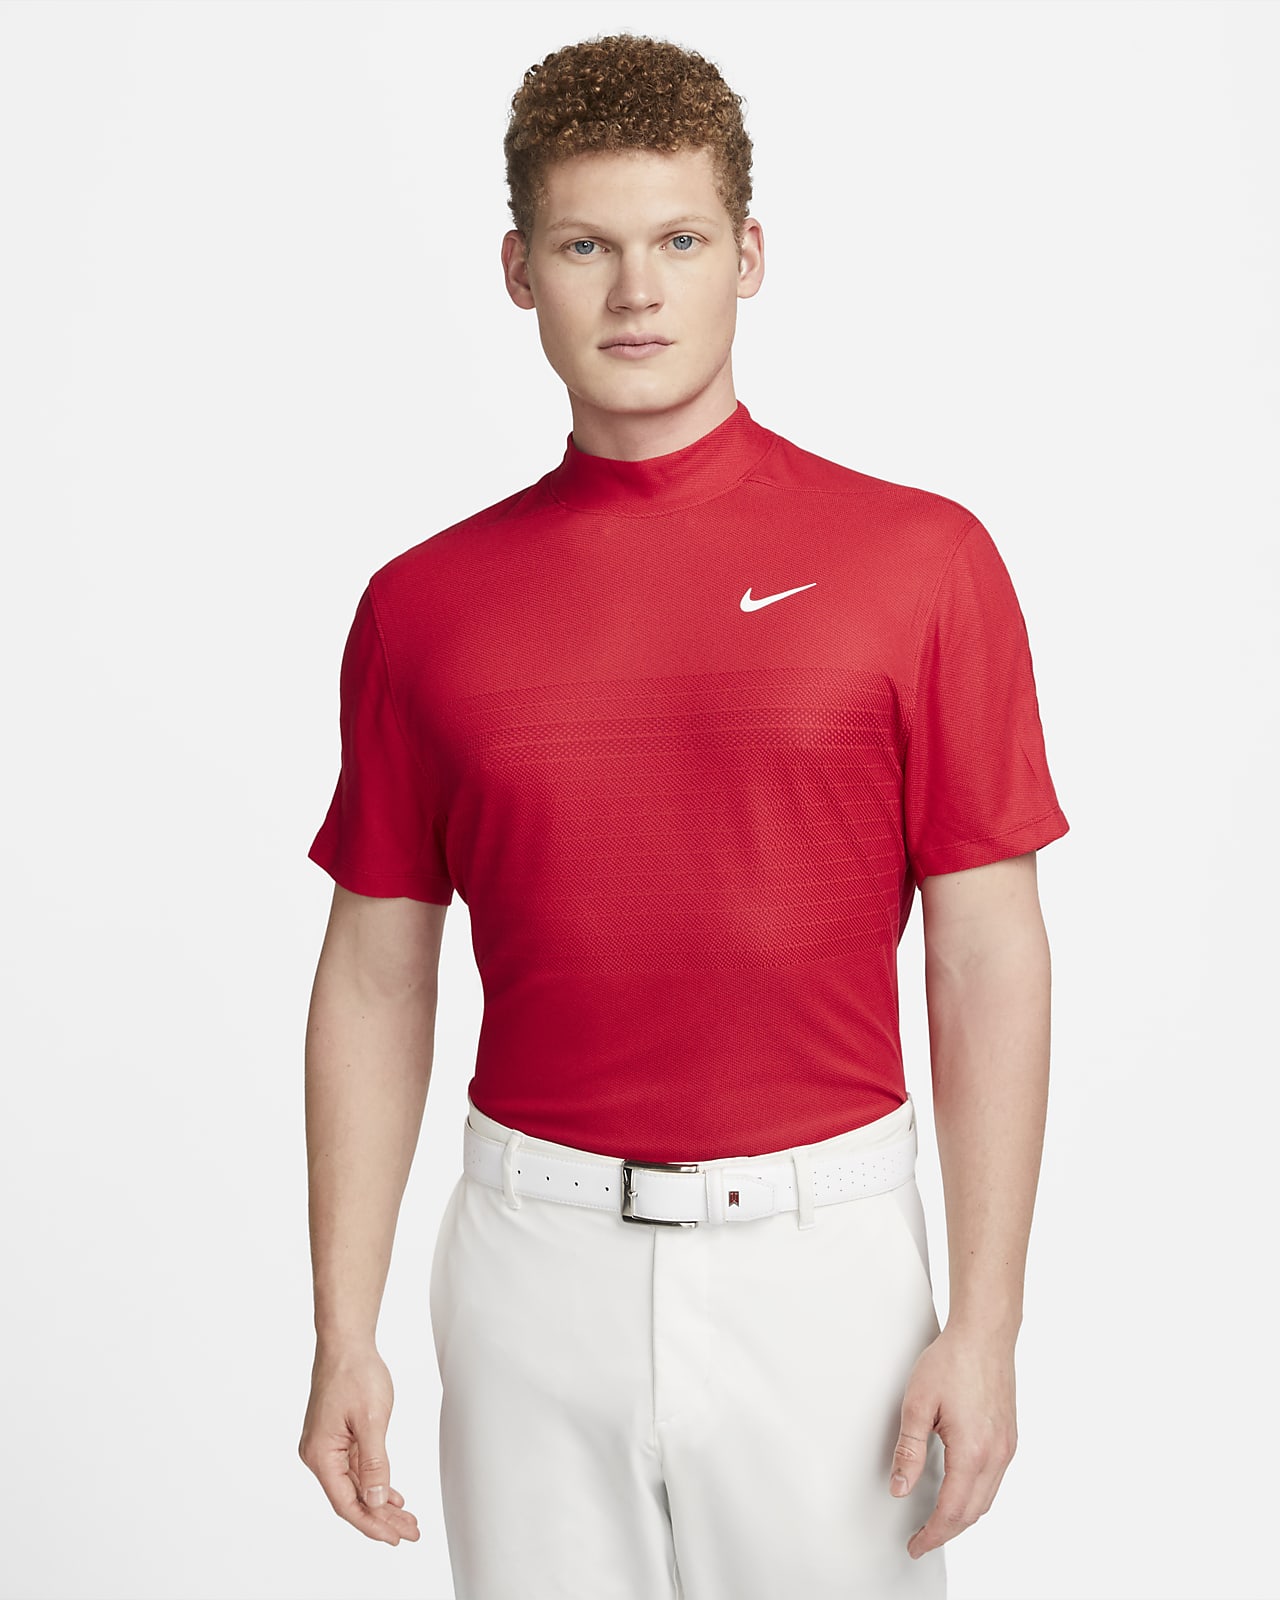 nike roll neck golf top